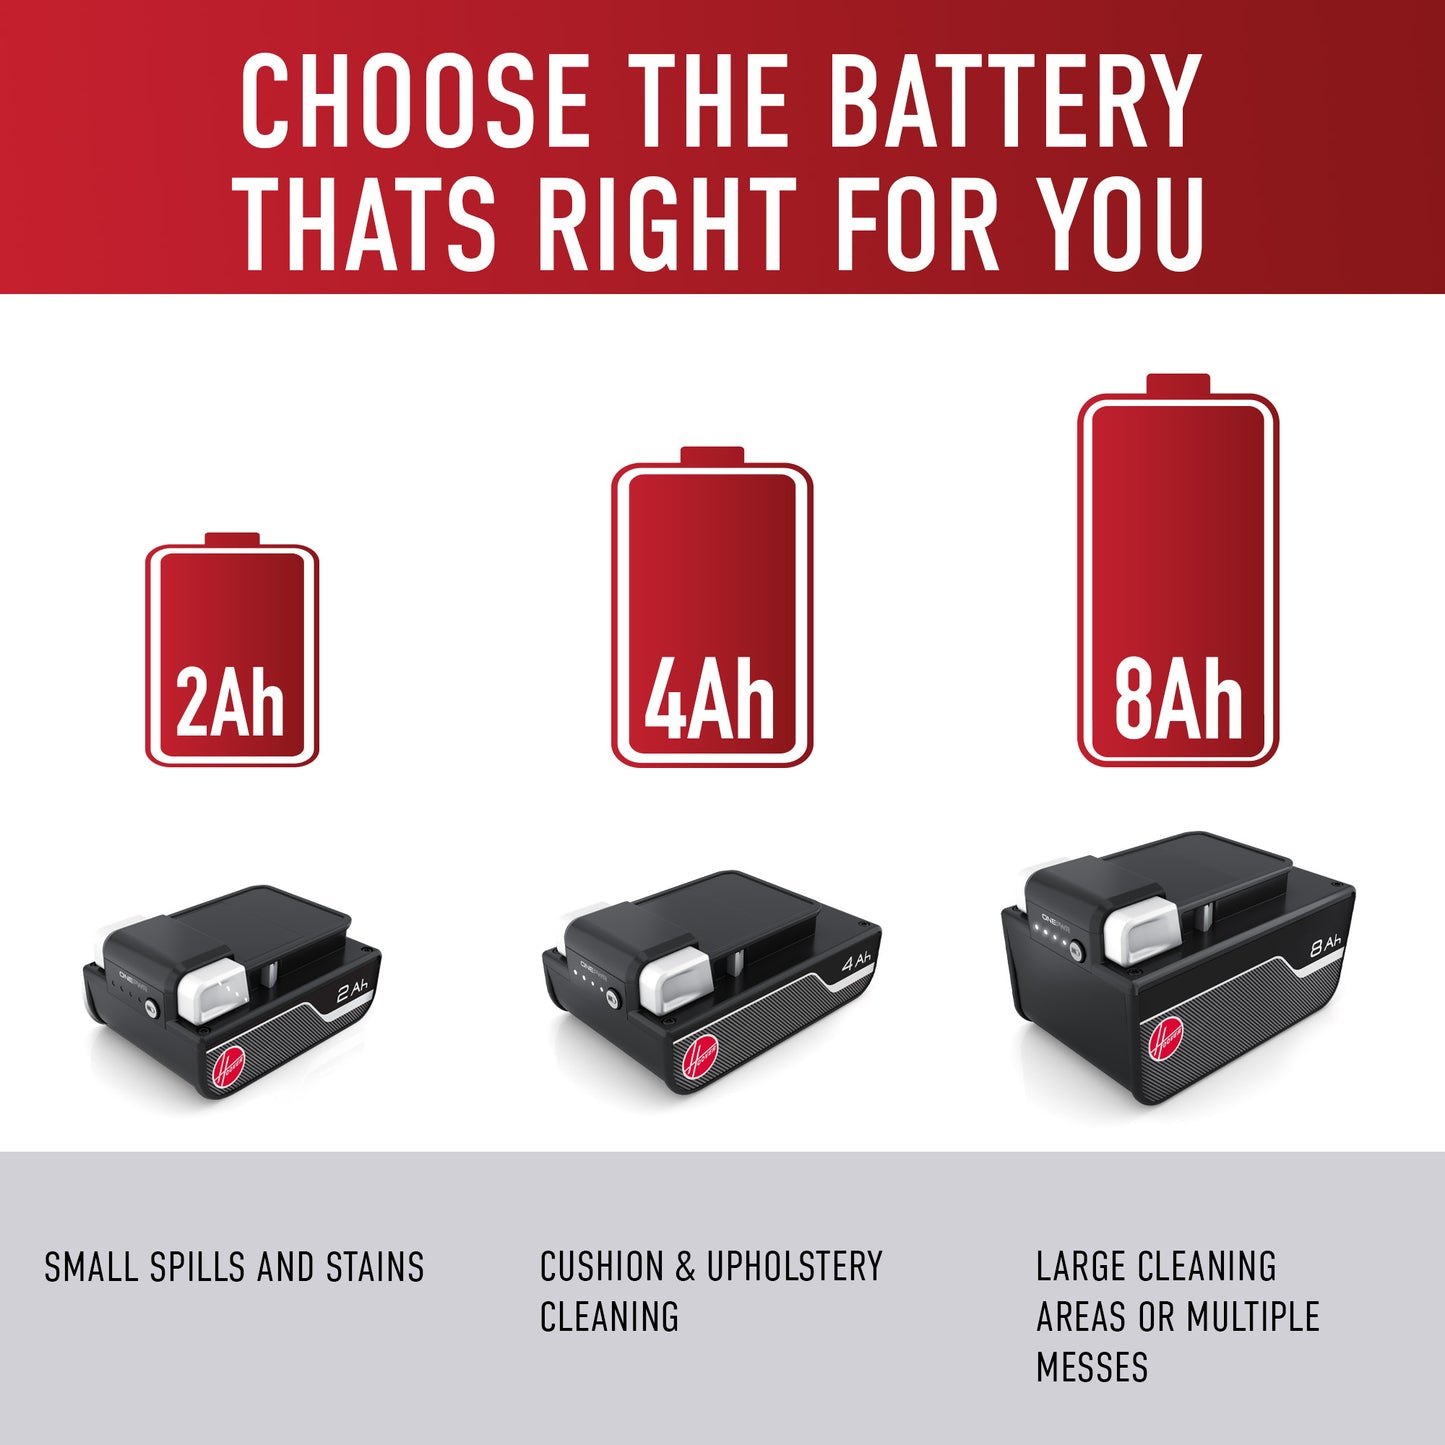 Comparison of 3 battery sizes to choose the right battery for you.  They recommend a 2ah battery for small spills and stains, 4ah battery for cushion and upholstery cleaning and 8ah battery for large cleaning areas or multiple messes.